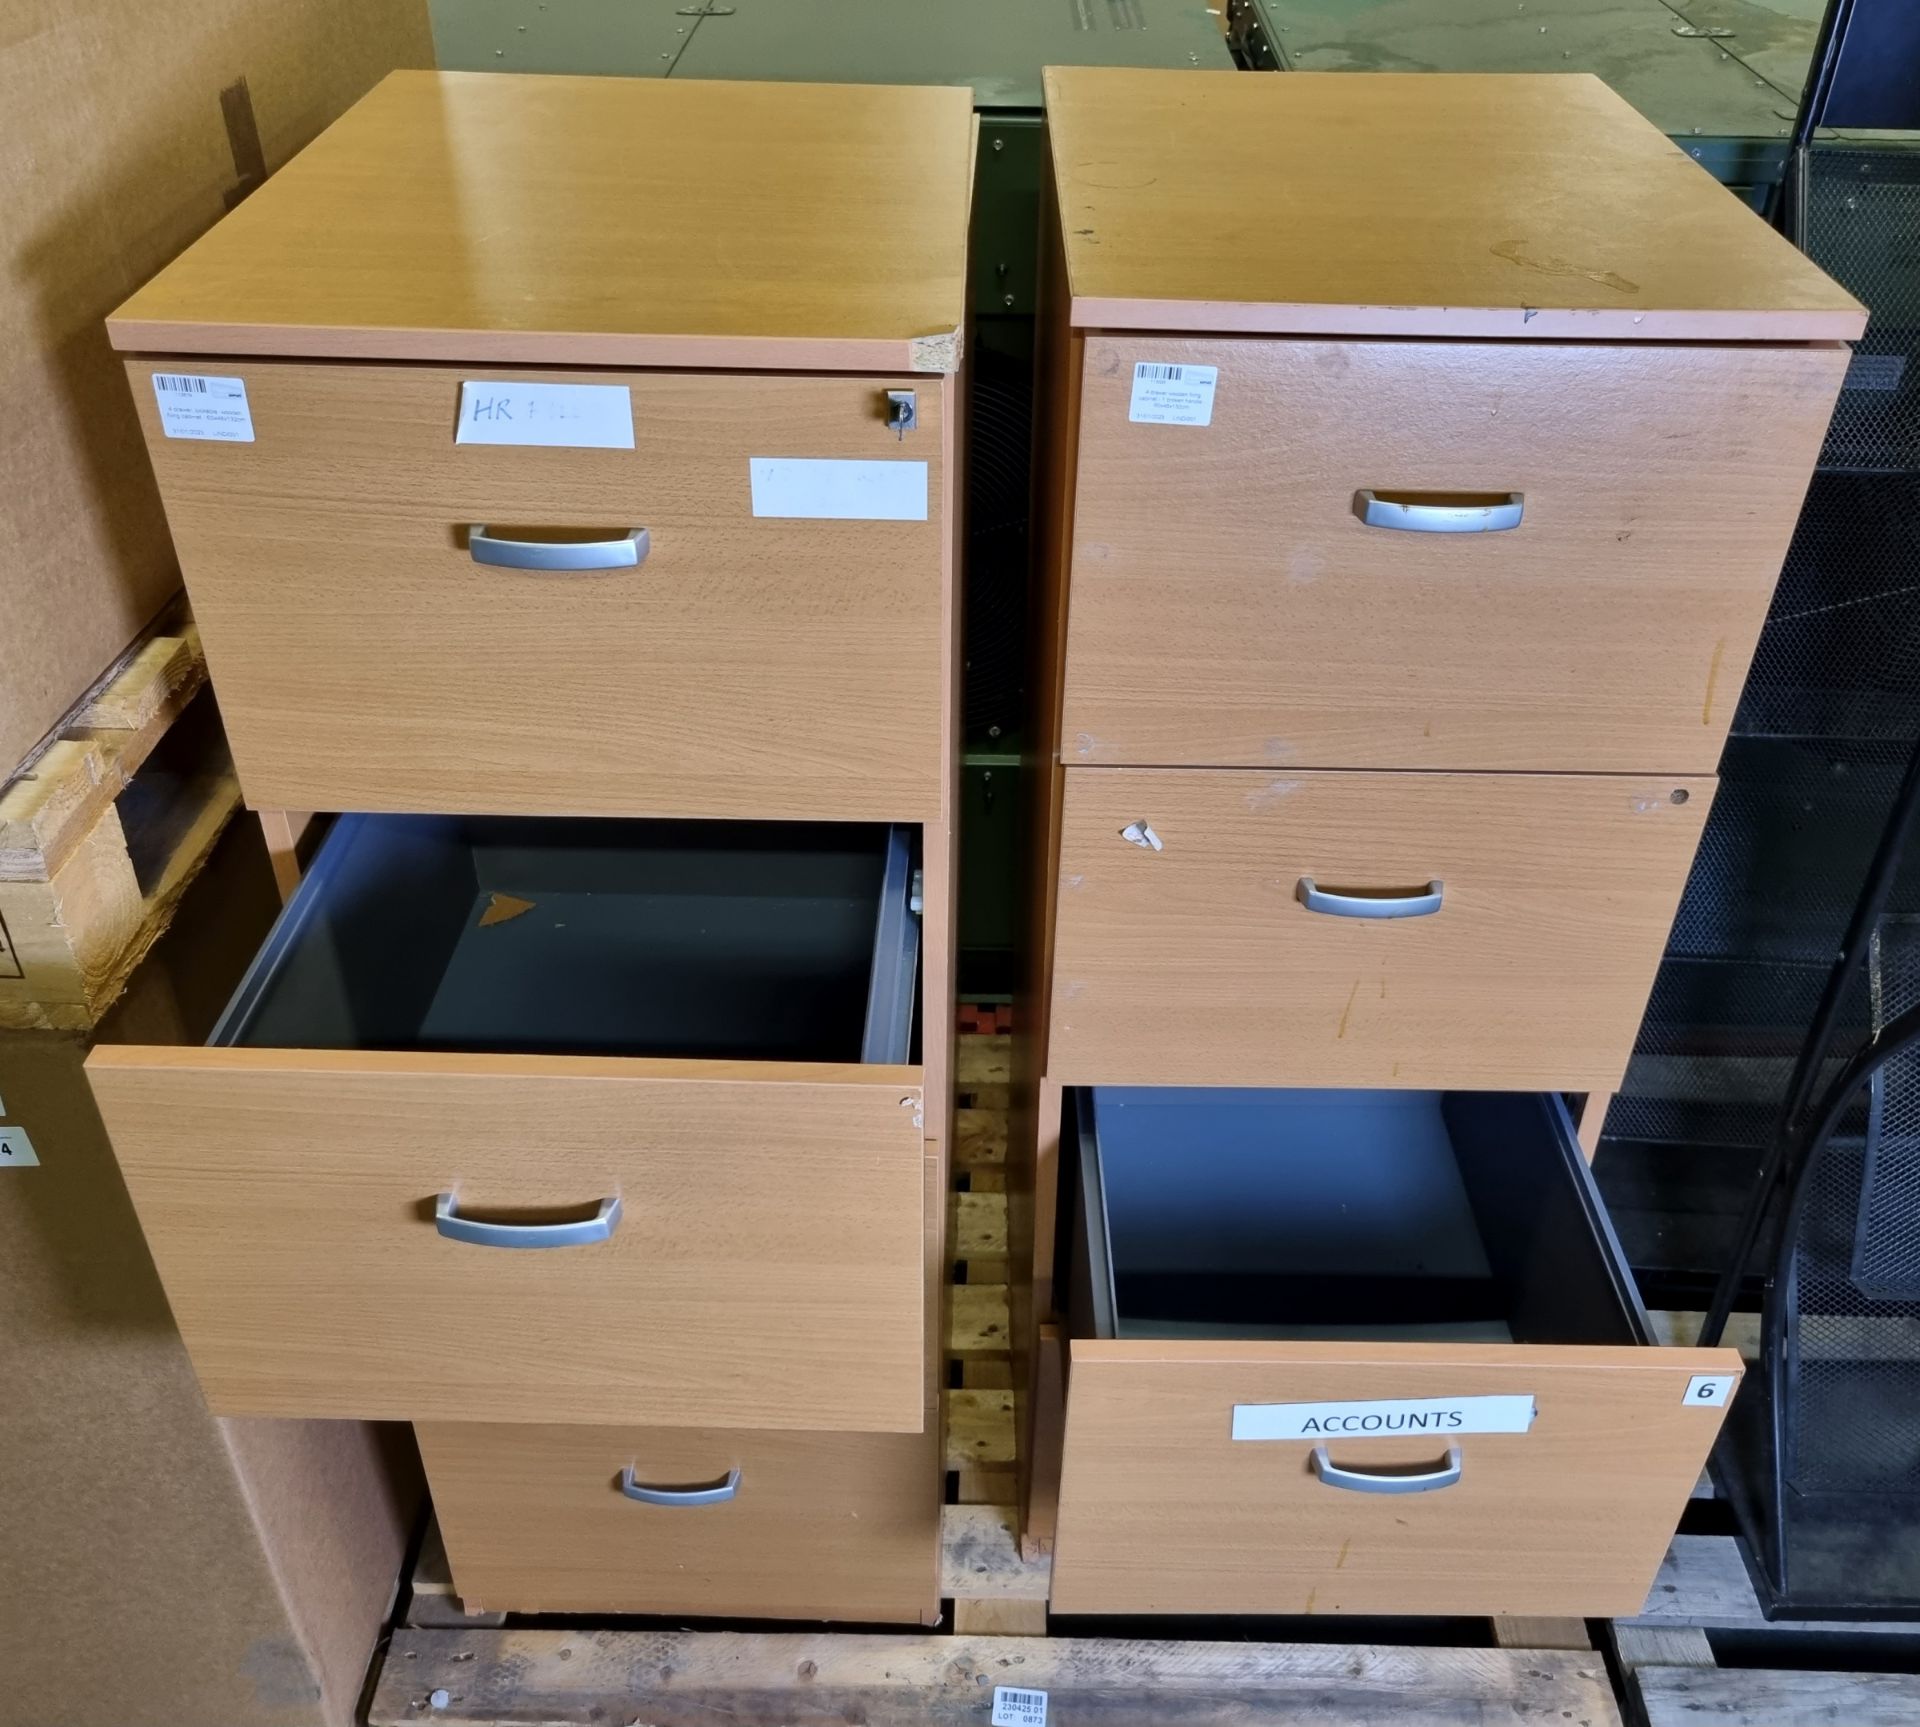 2x 4 drawer wooden filing cabinets - Image 3 of 7